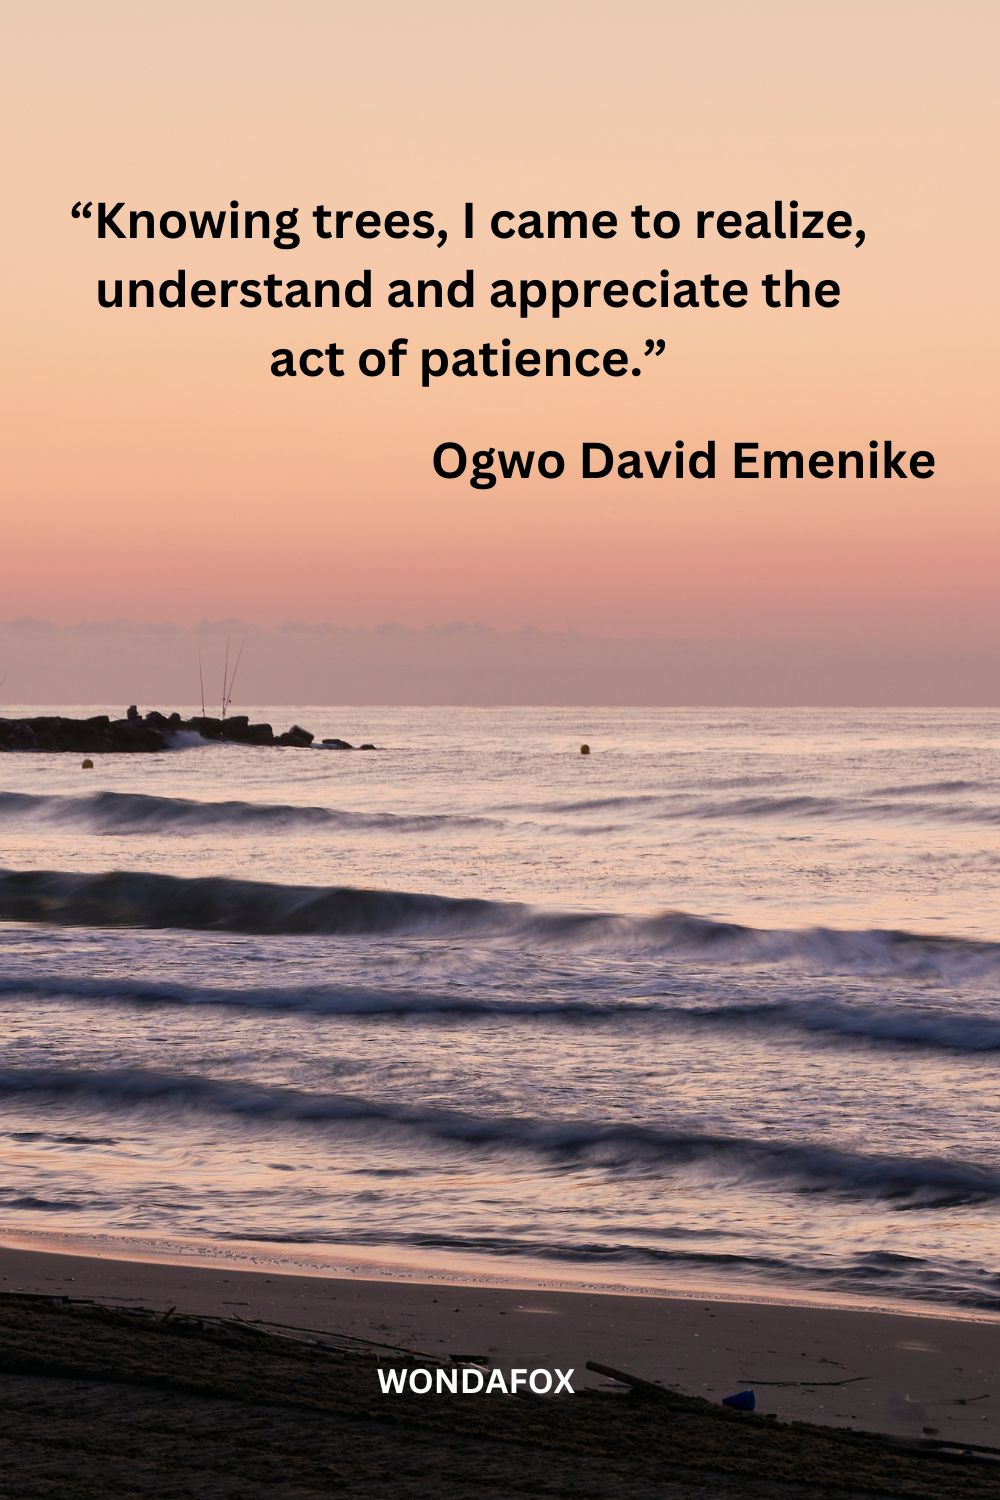 “Knowing trees, I came to realize, understand and appreciate the act of patience.”
Ogwo David Emenike